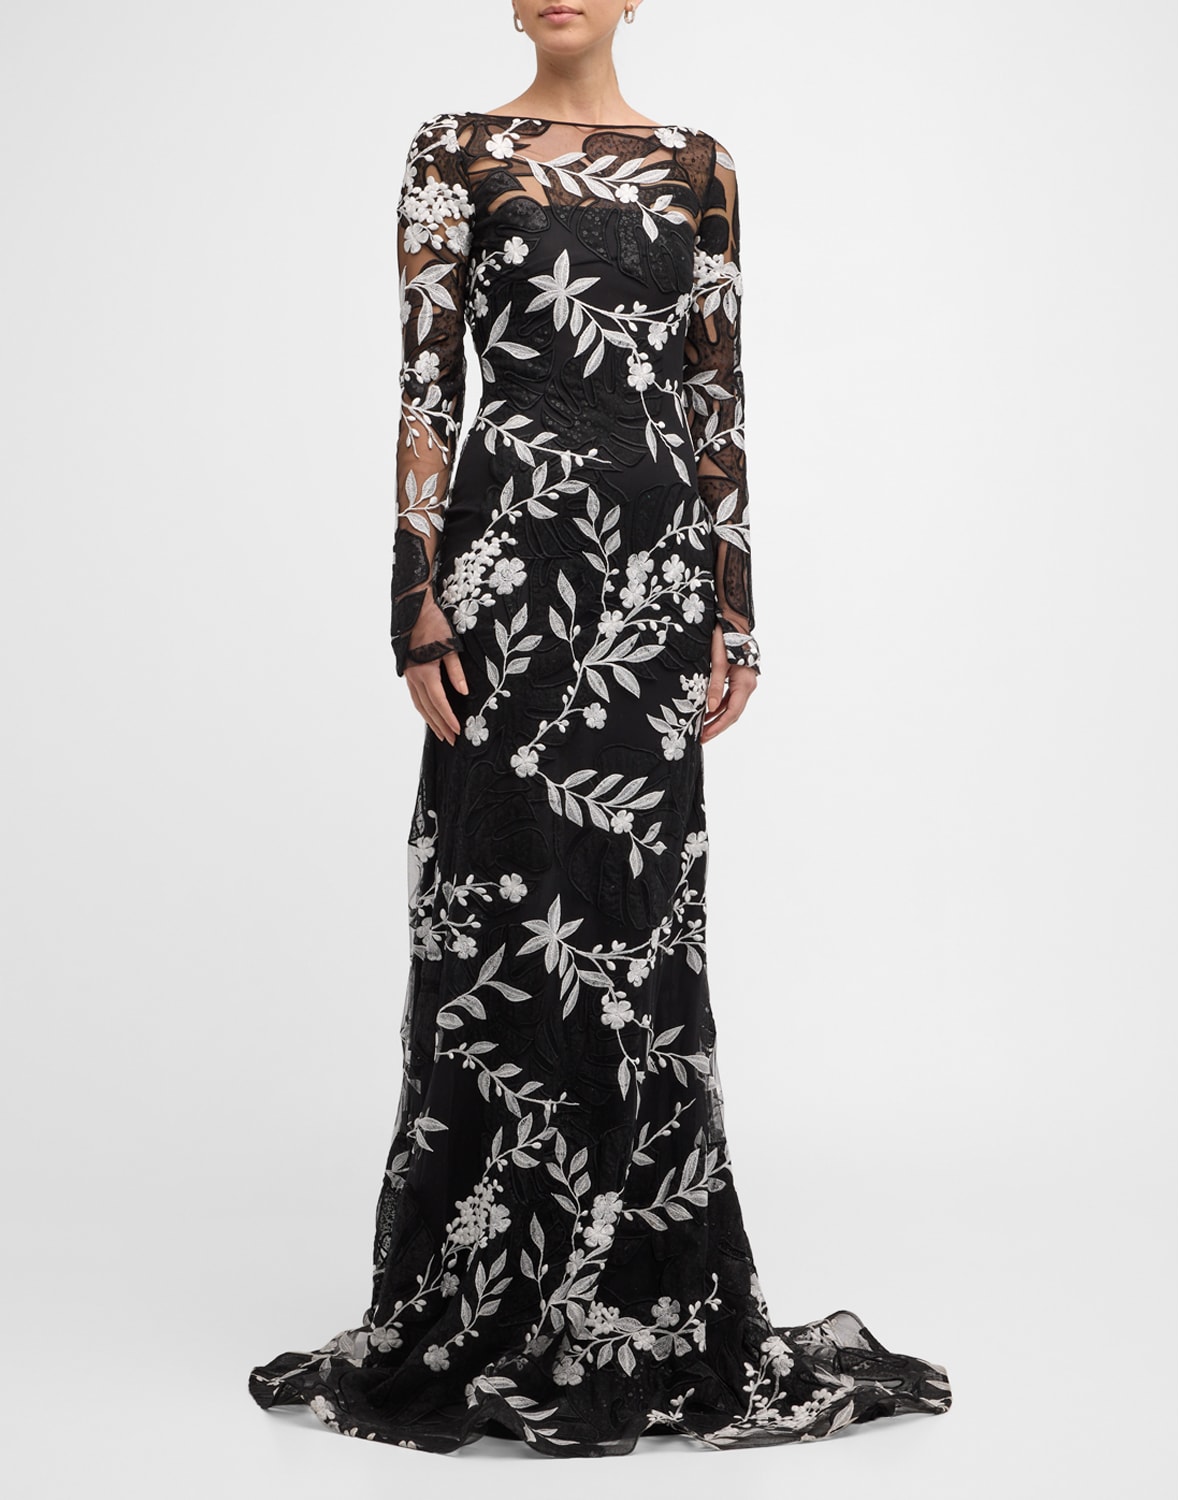 Floral Embroidered Gown with Sheer Overlay